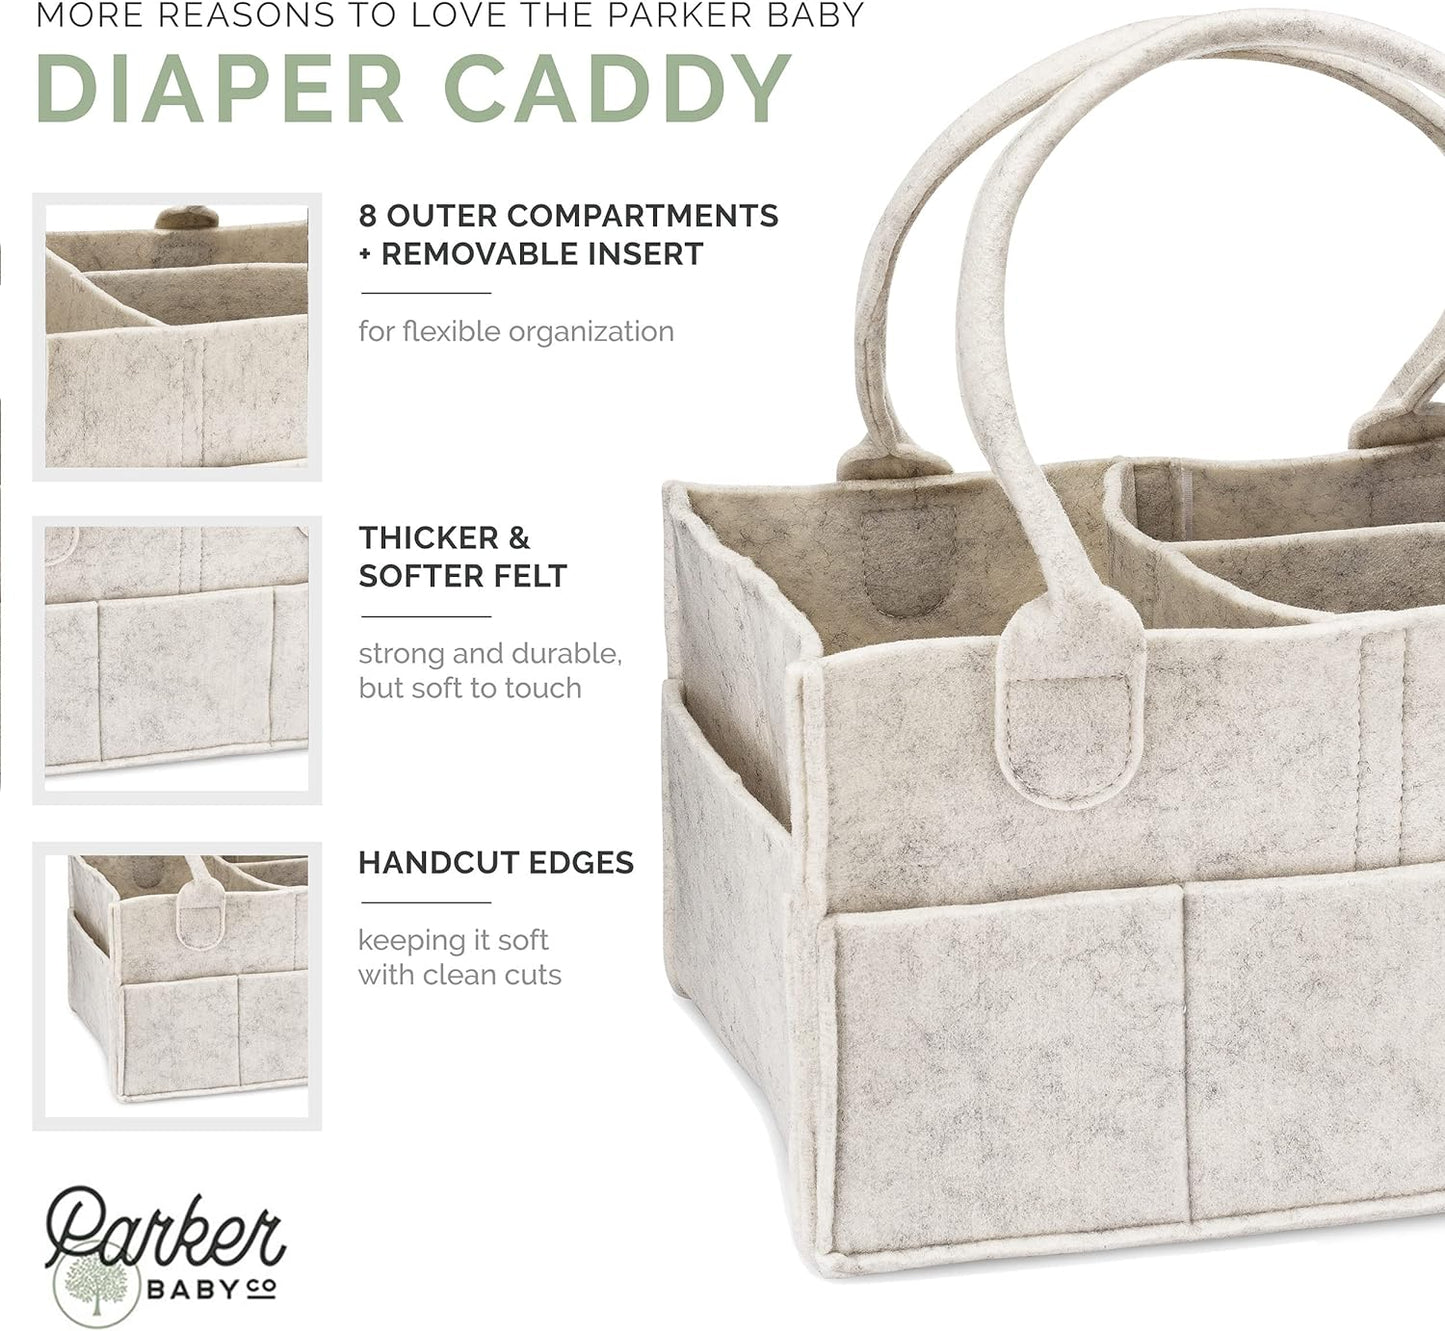 Parker Baby Diaper Caddy - Nursery Storage Bin and Car Organizer for Diapers and Baby Wipes - White